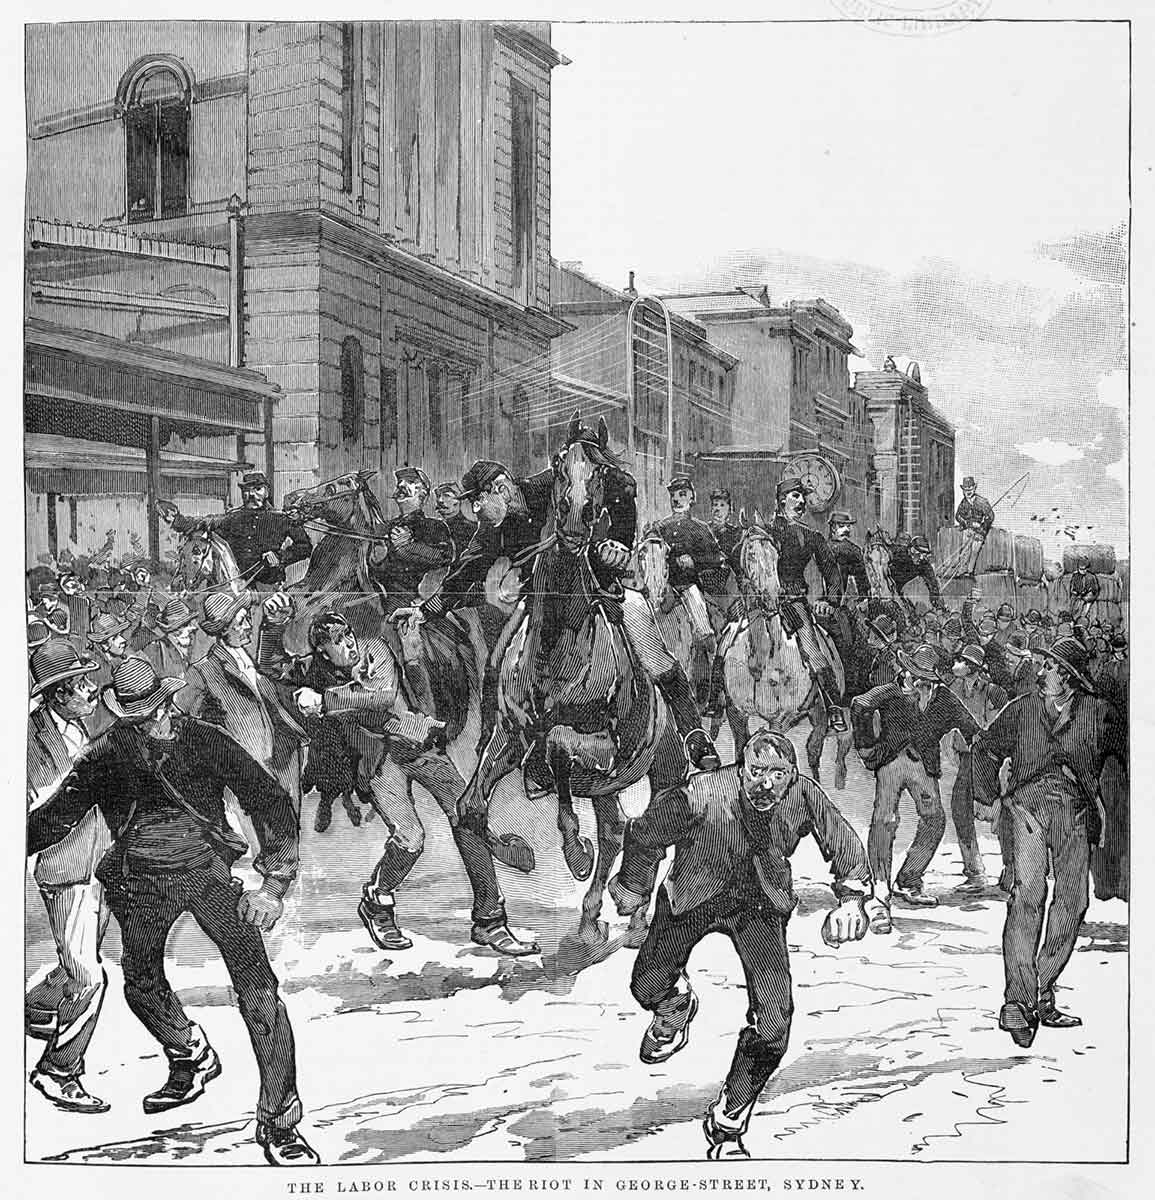 Black and white illustration depicting a riot between workmen and police on horseback. Printed at the bottom is 'THE LABOR CRISIS—THE RIOT IN GEORGE STREET, SYDNEY'.